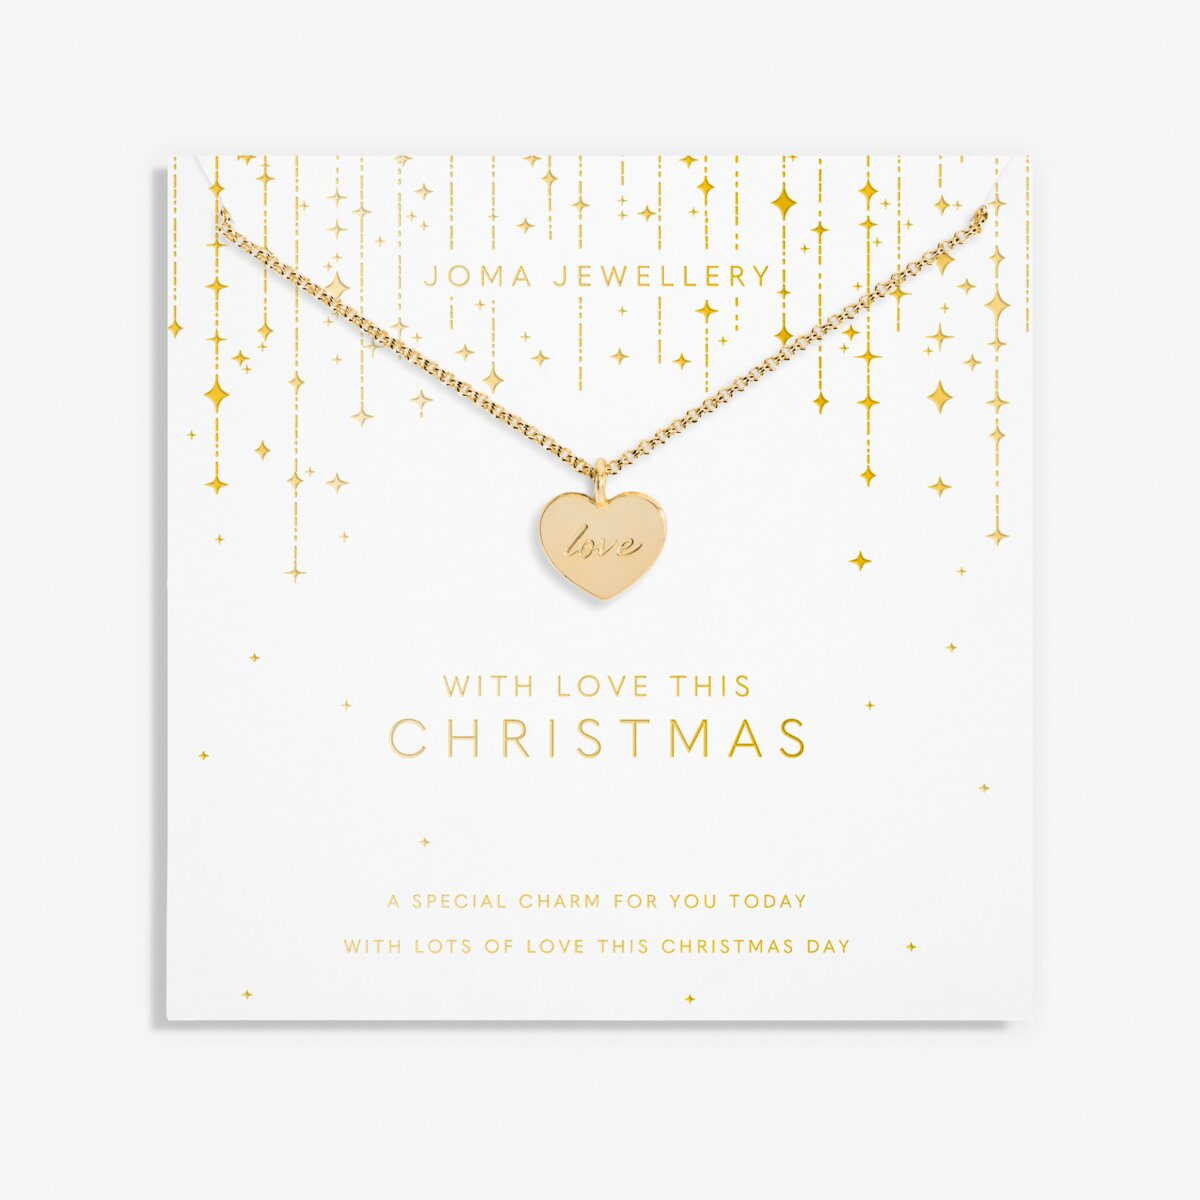 JOMA JEWELLERY | MY MOMENTS CHARISTMAS | WITH LOVE NECKLACE